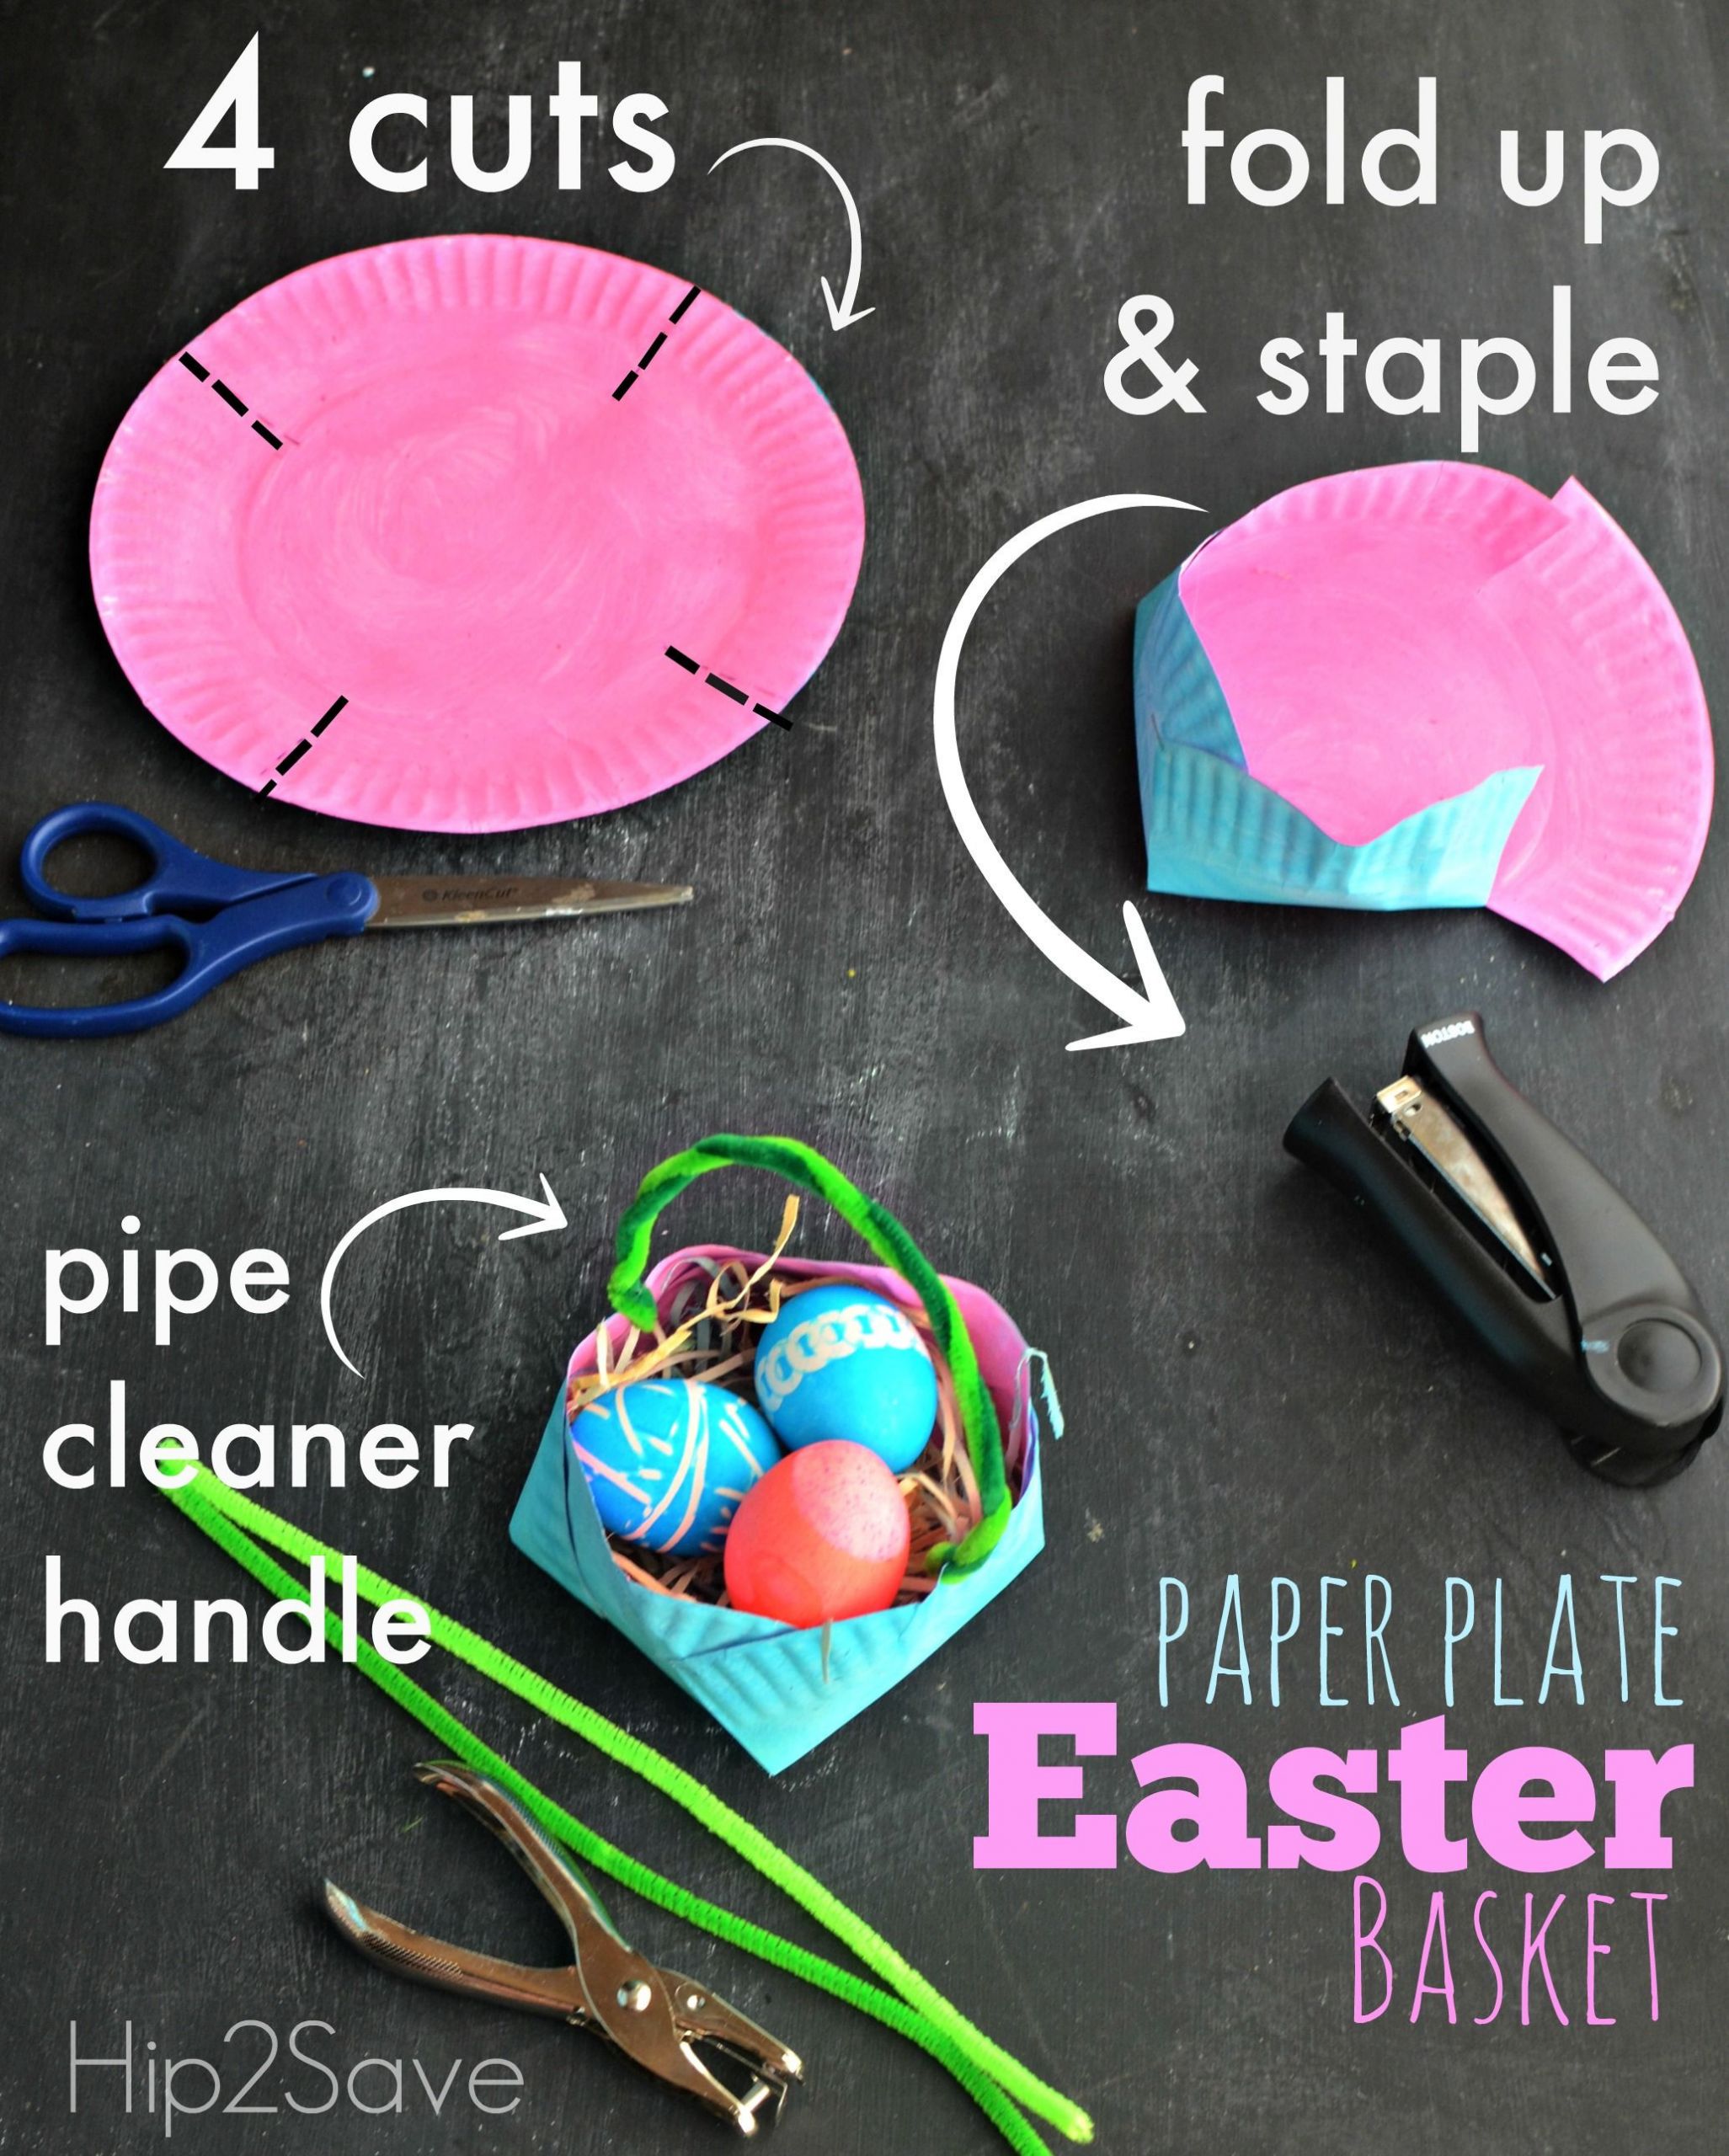 Easter Basket Craft Ideas For Preschoolers
 How to make an Easter basket out of a paper plate Hip2Save